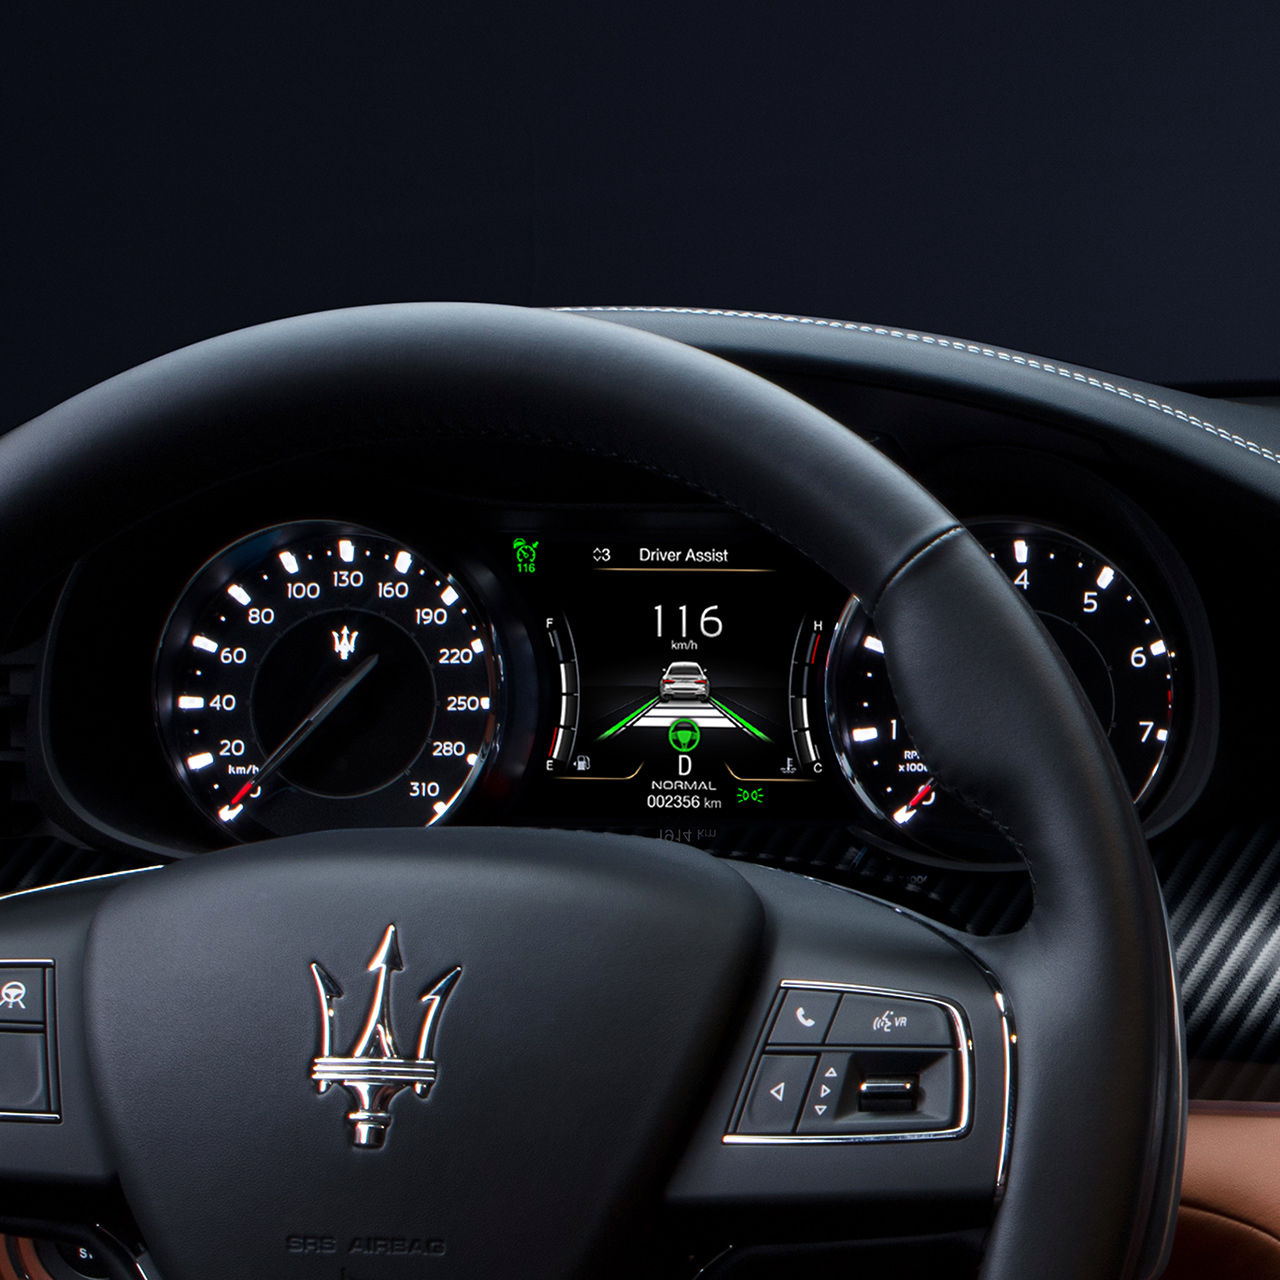 Driver Assist System on Dashboard of Quattroporte